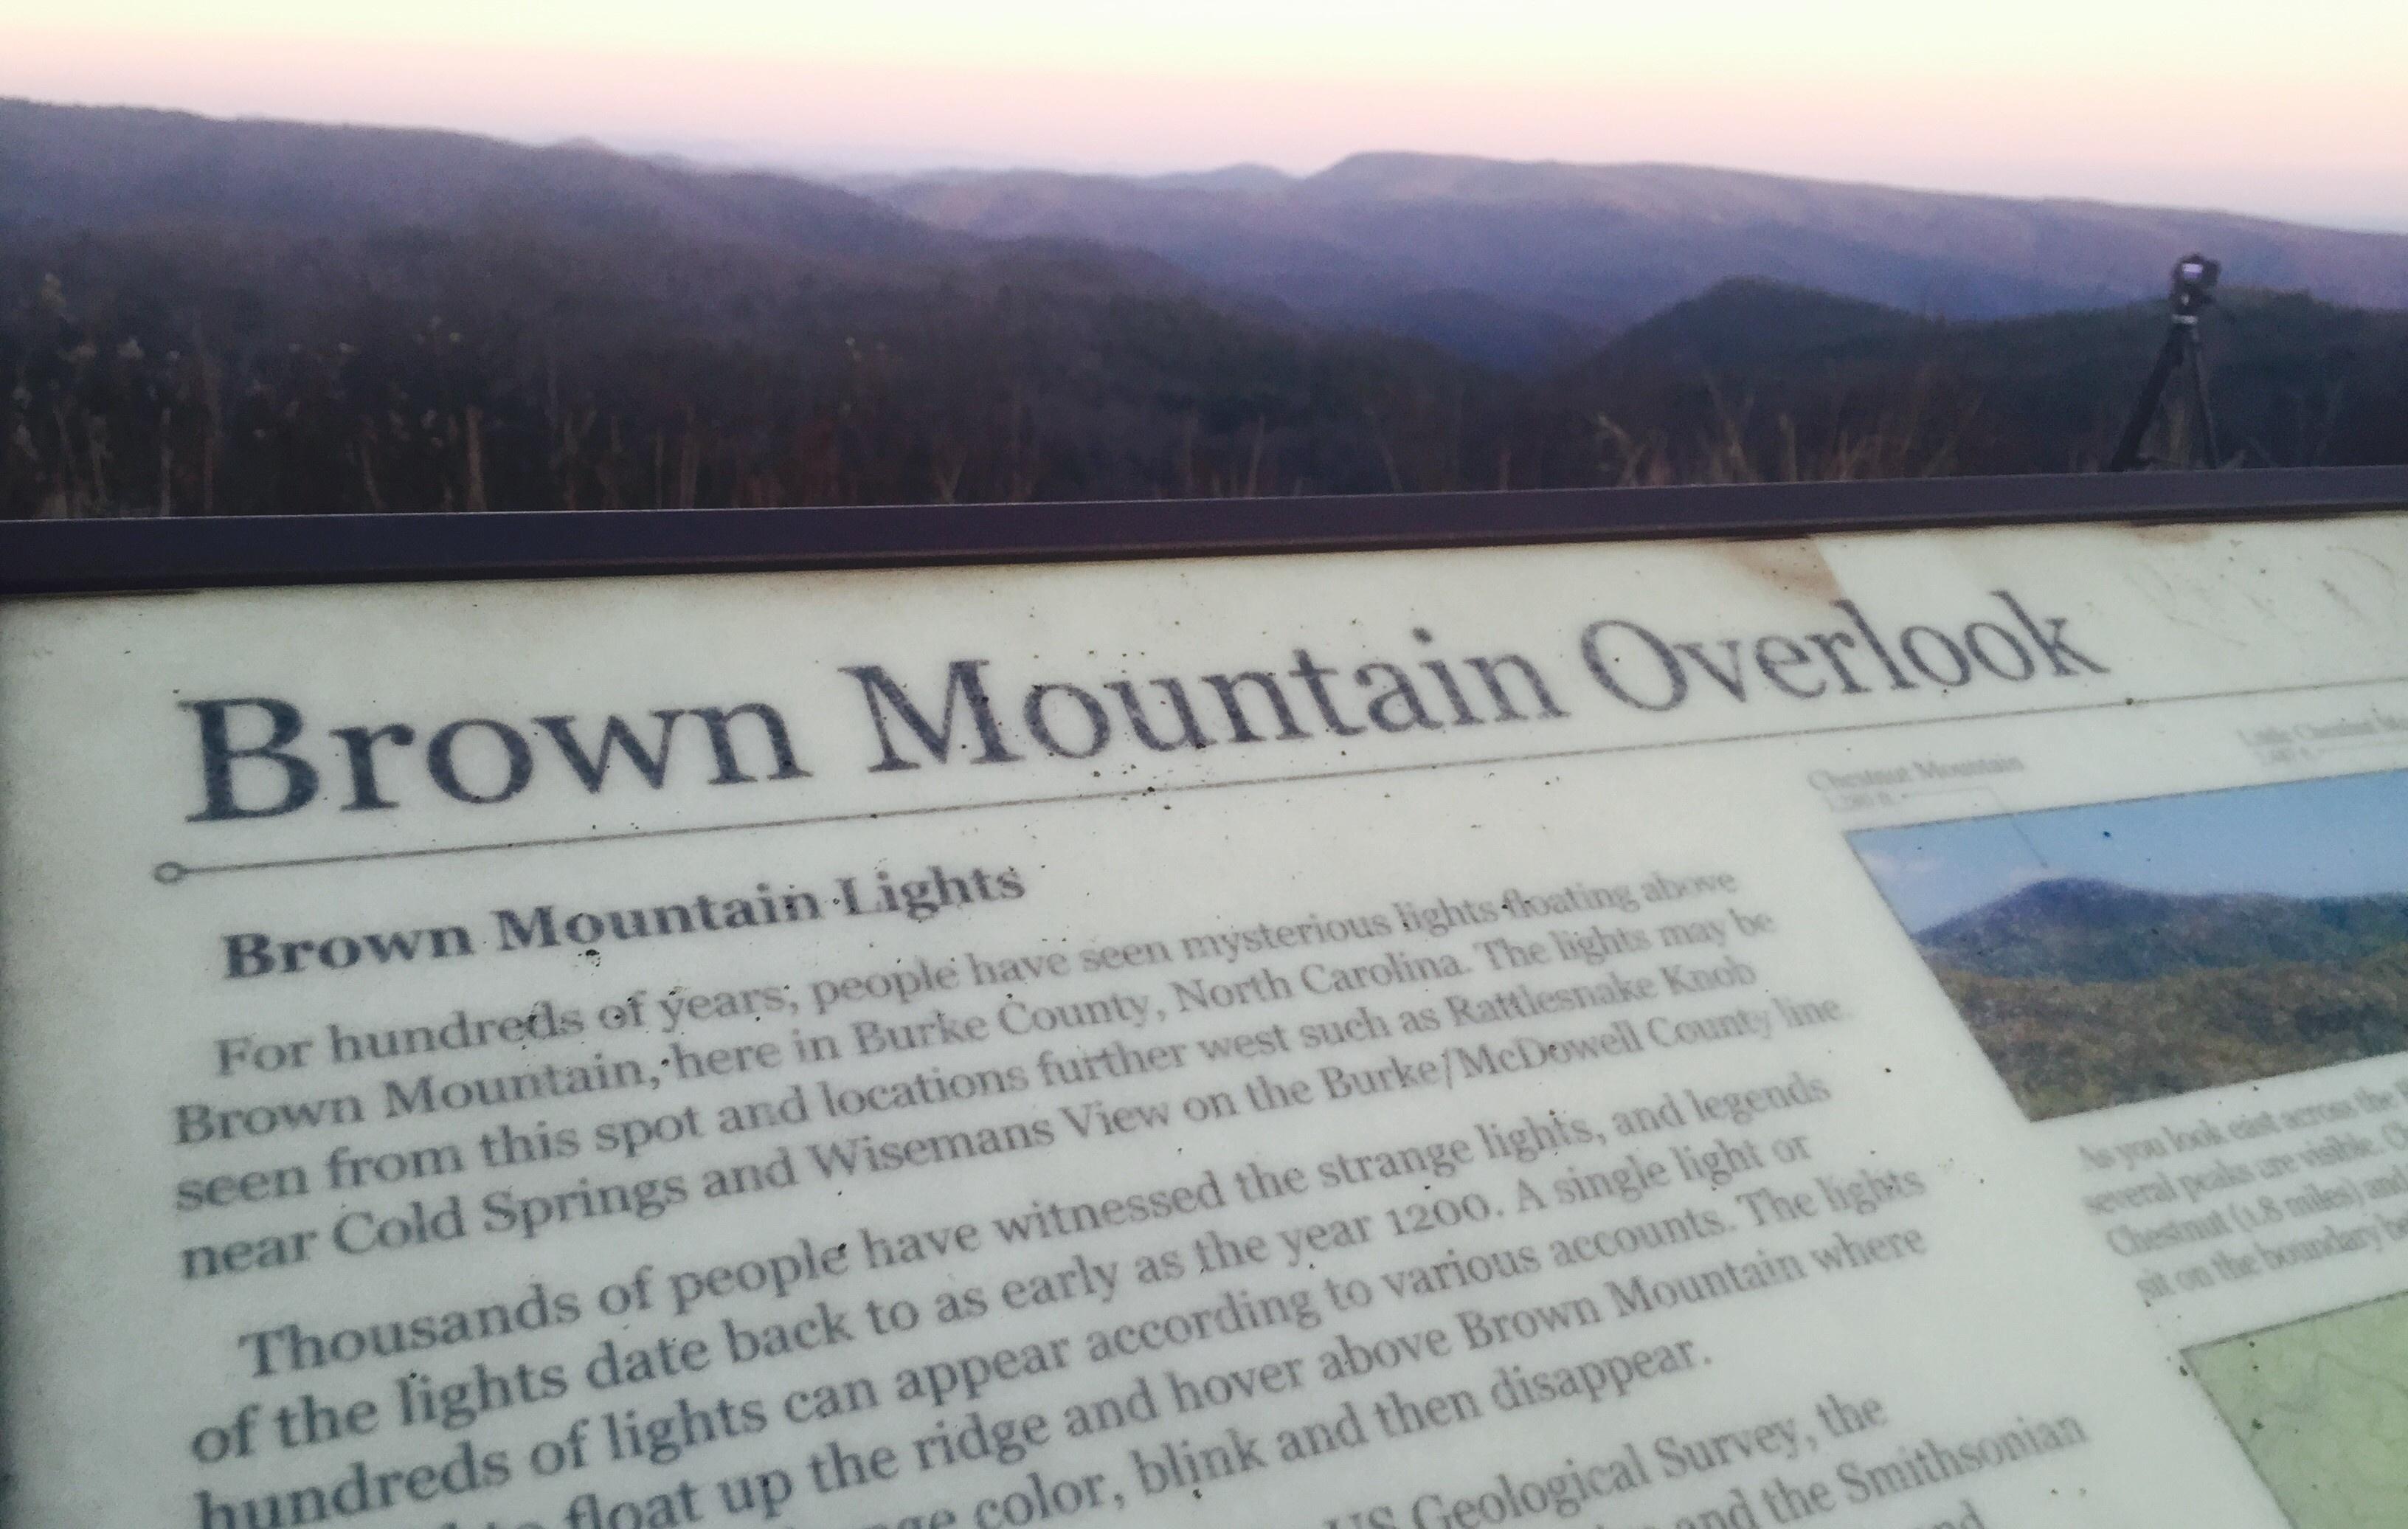 A photo of a mounted infographic with the title "Brown Mountain Overlook". Following is blurry text explaining the history of the mountain lights.